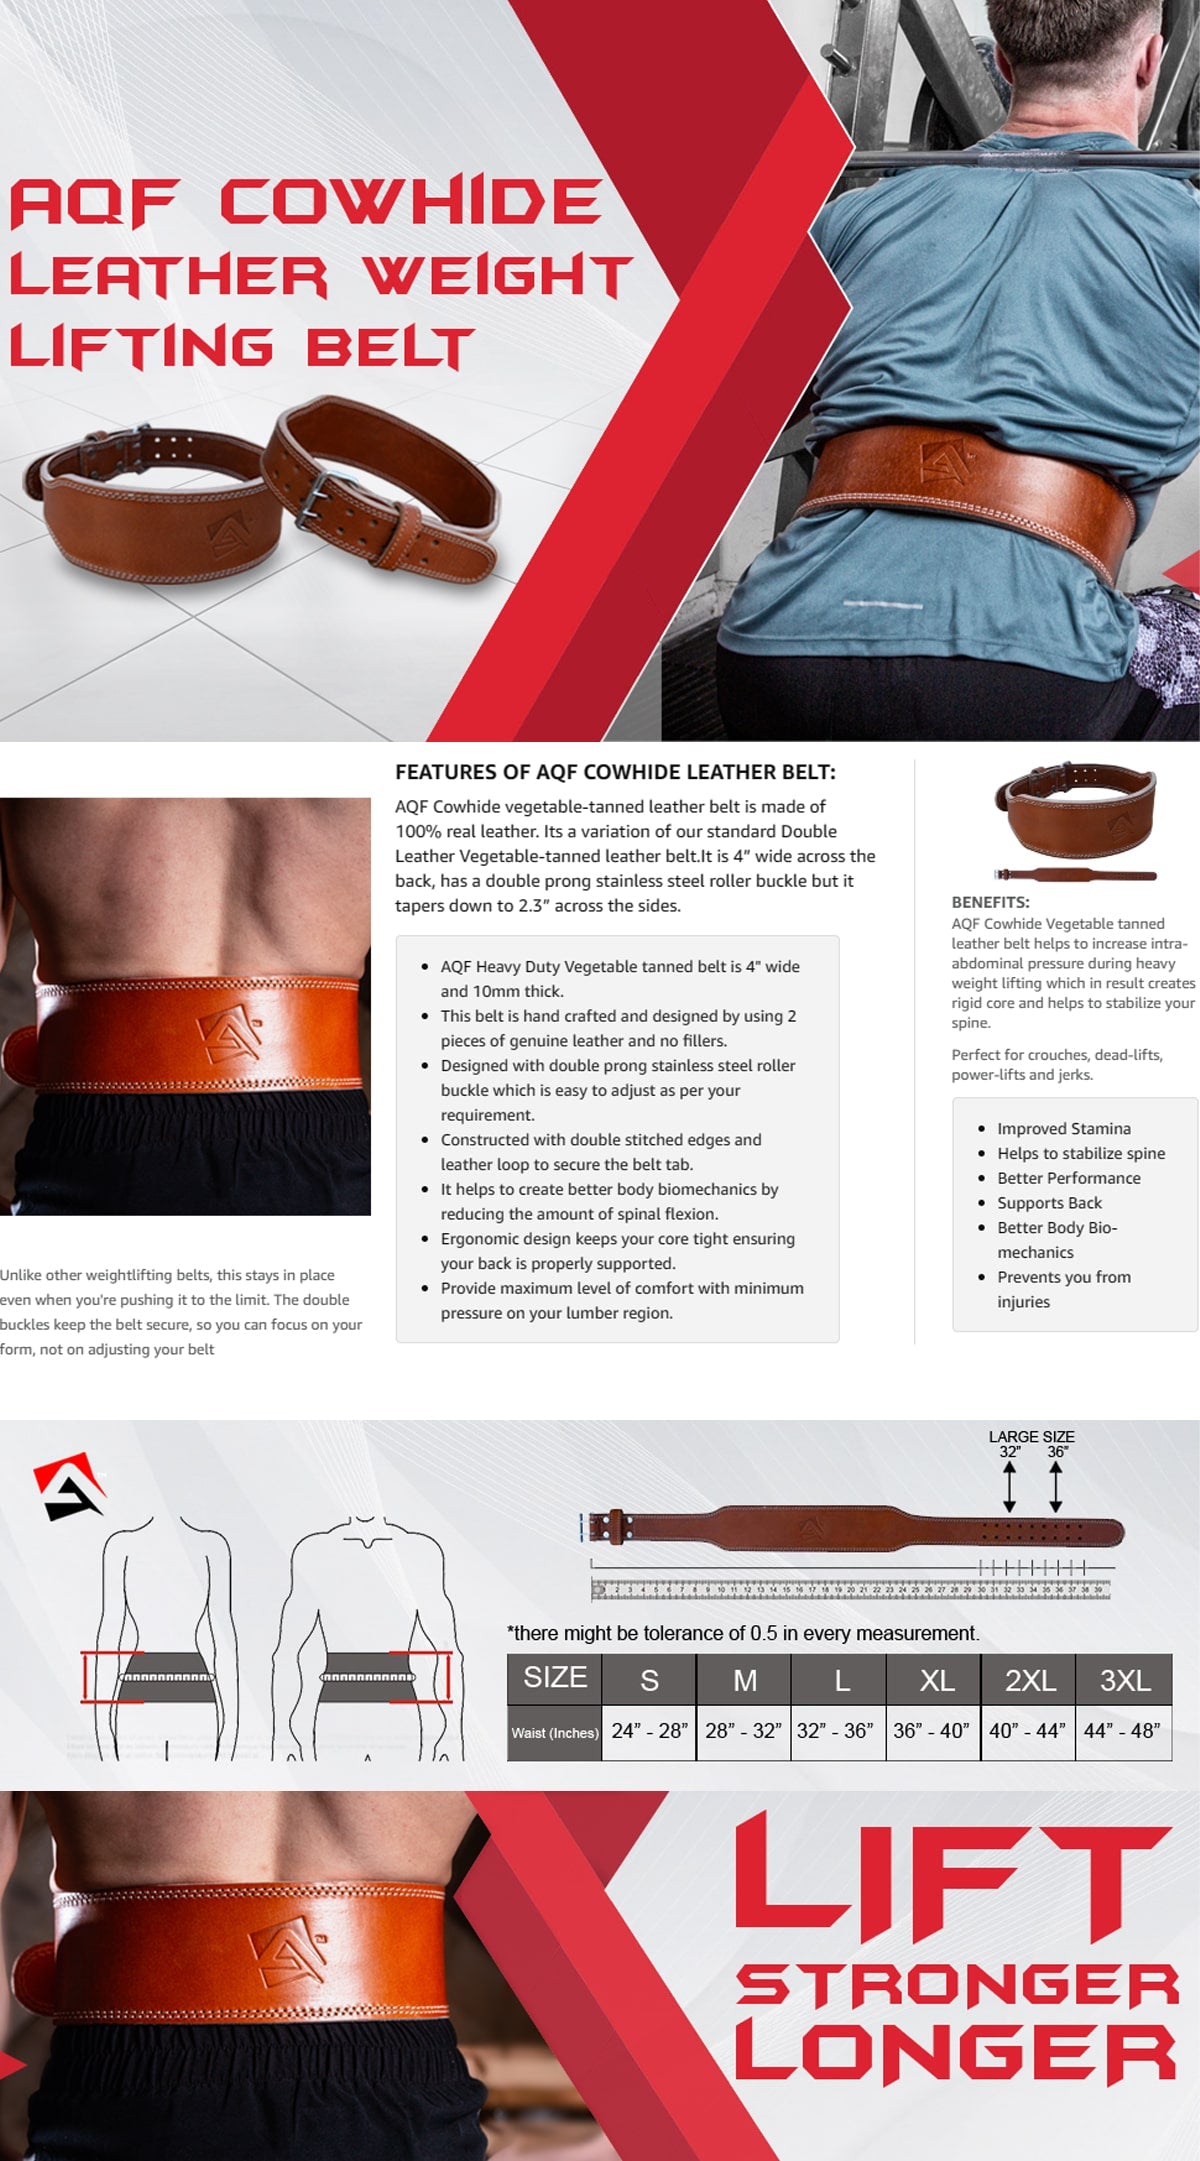 products/product_description-AQF4_LeatherWeightLiftingBelt10mmThick100_RealLeather_NoFillers.jpg